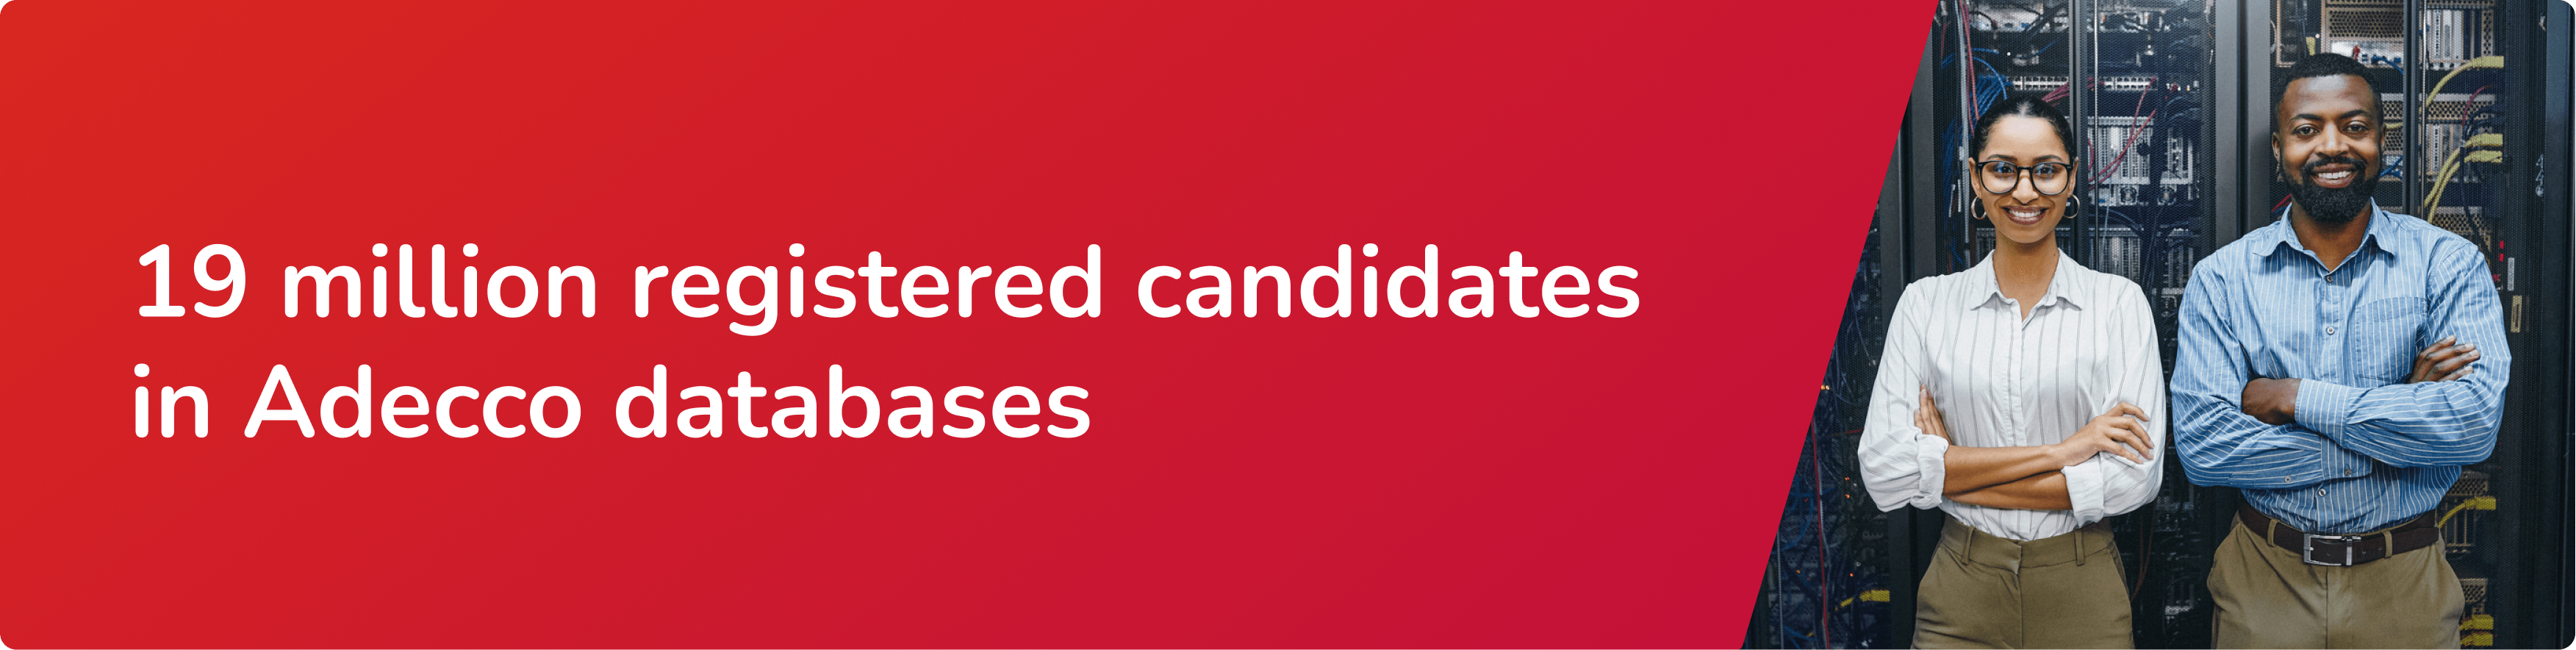 19 million registered candidates in Adecco databases